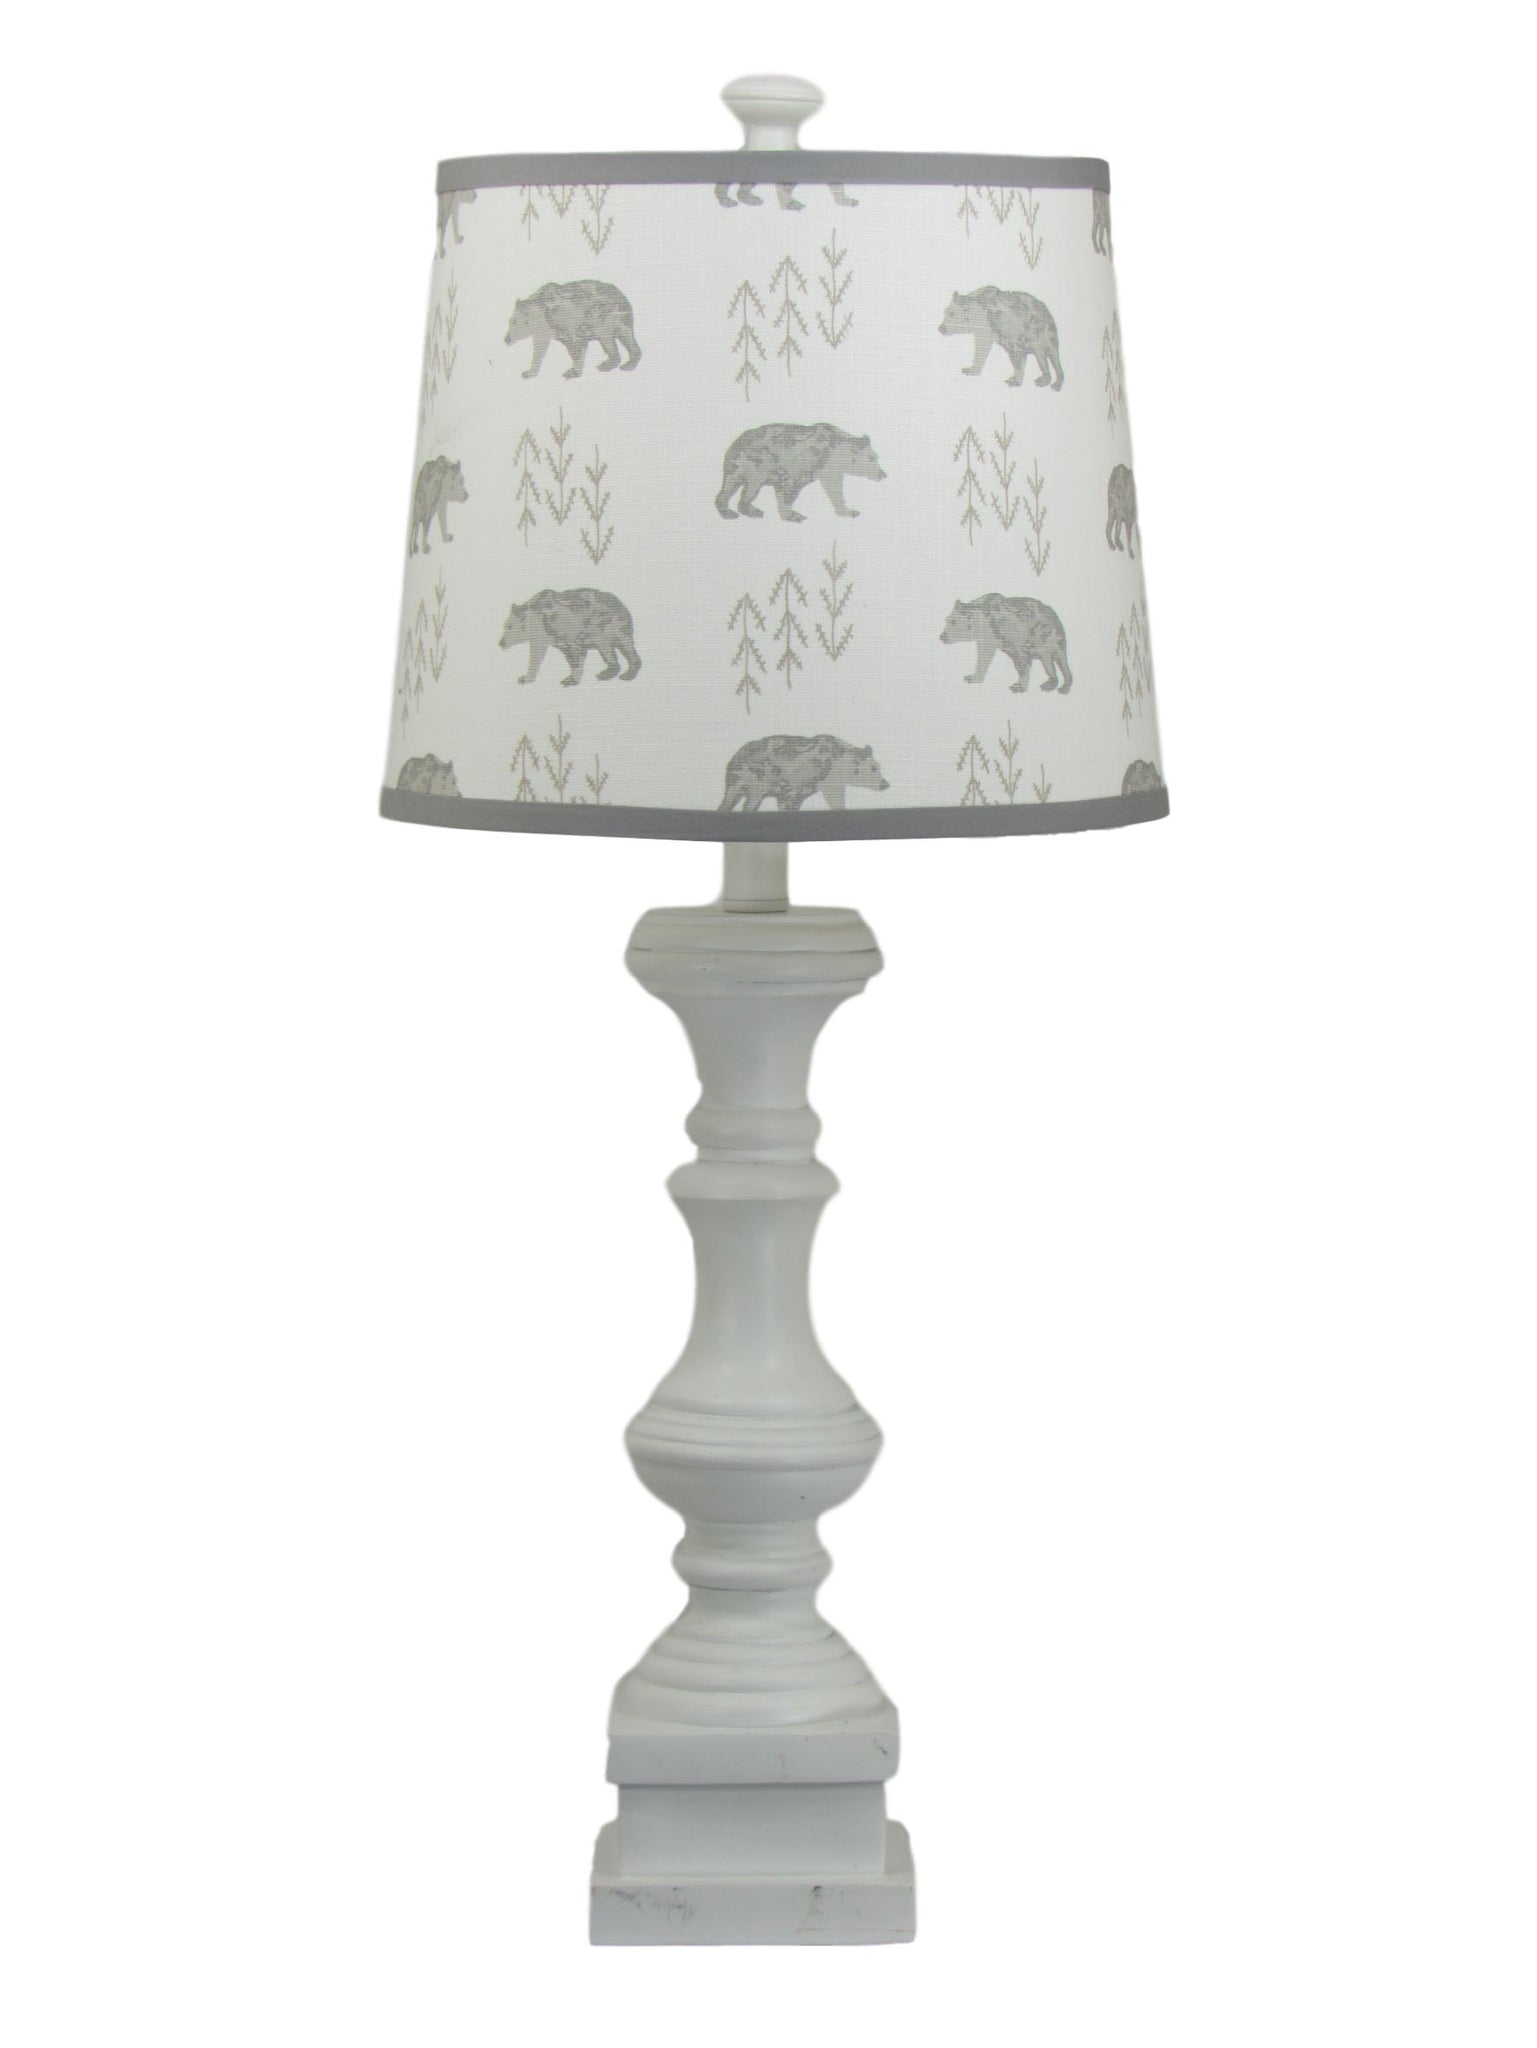 White Spindle Table Lamp with Bear Shade - Albert Estate Ltd.